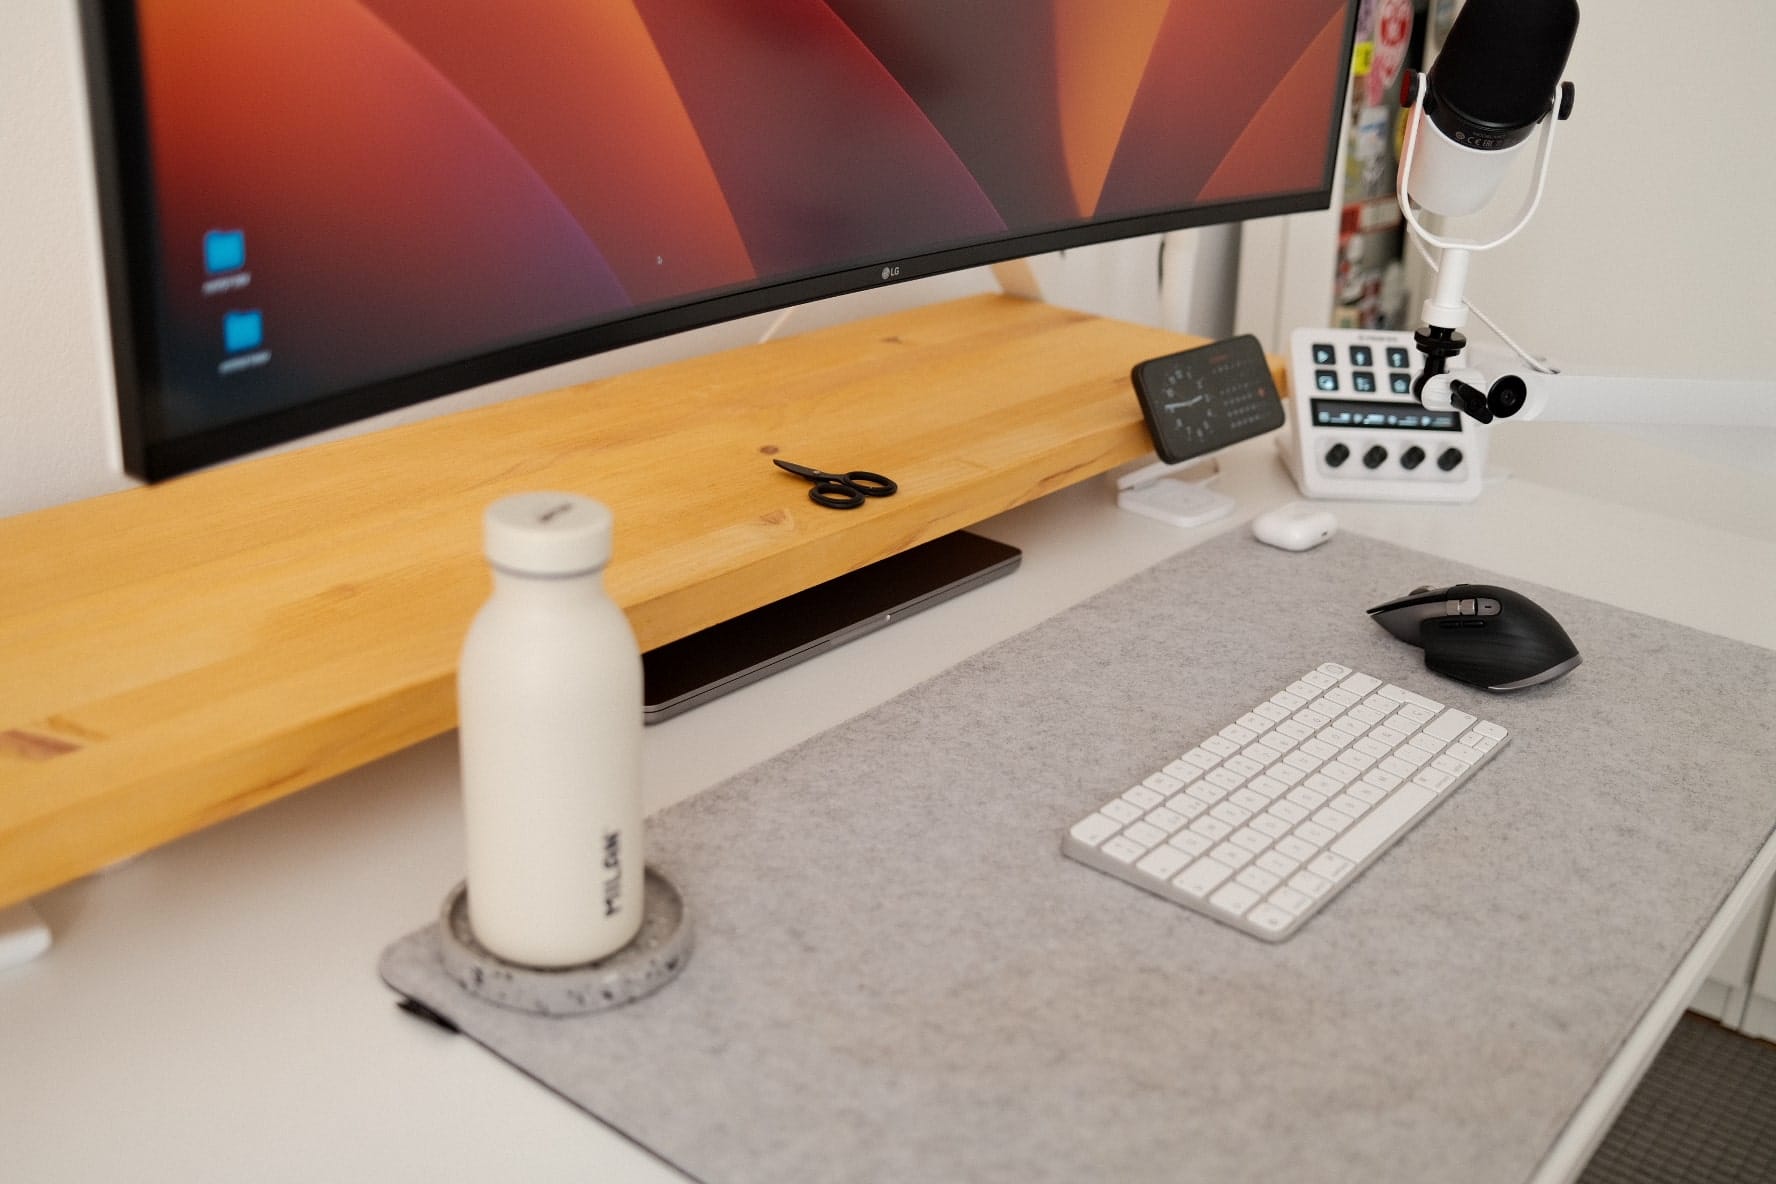 A tidy desk featuring a large monitor, white keyboard, ergonomic mouse on a grey mat, wooden monitor stand with a laptop underneath, microphone on a boom arm, and a reusable water bottle